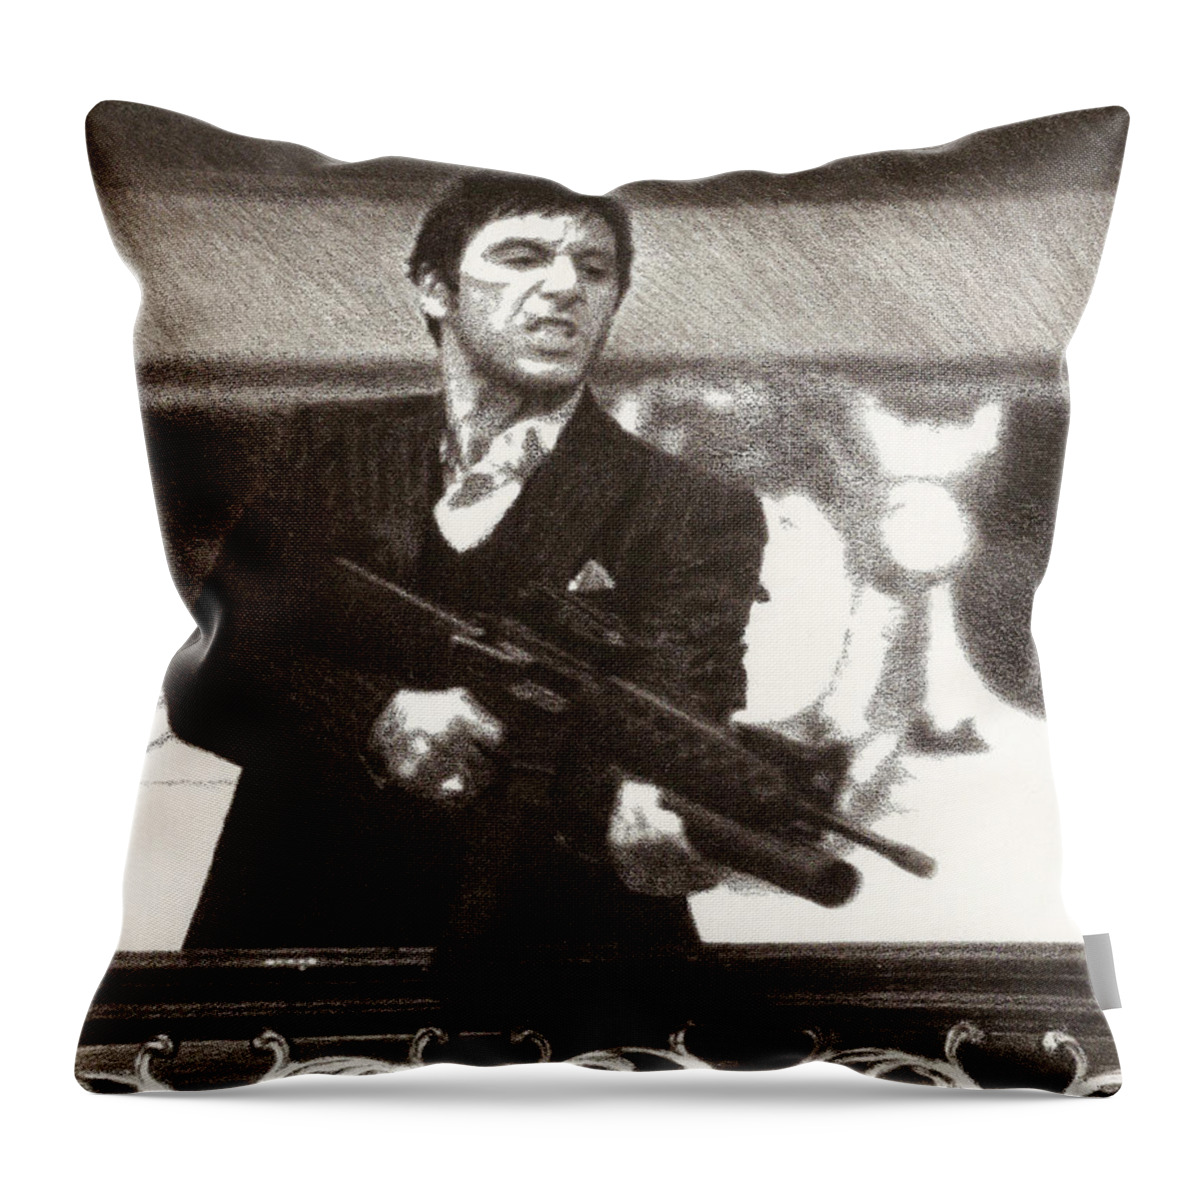 Scarface Throw Pillow featuring the drawing Tony Montana by Mark Baranowski